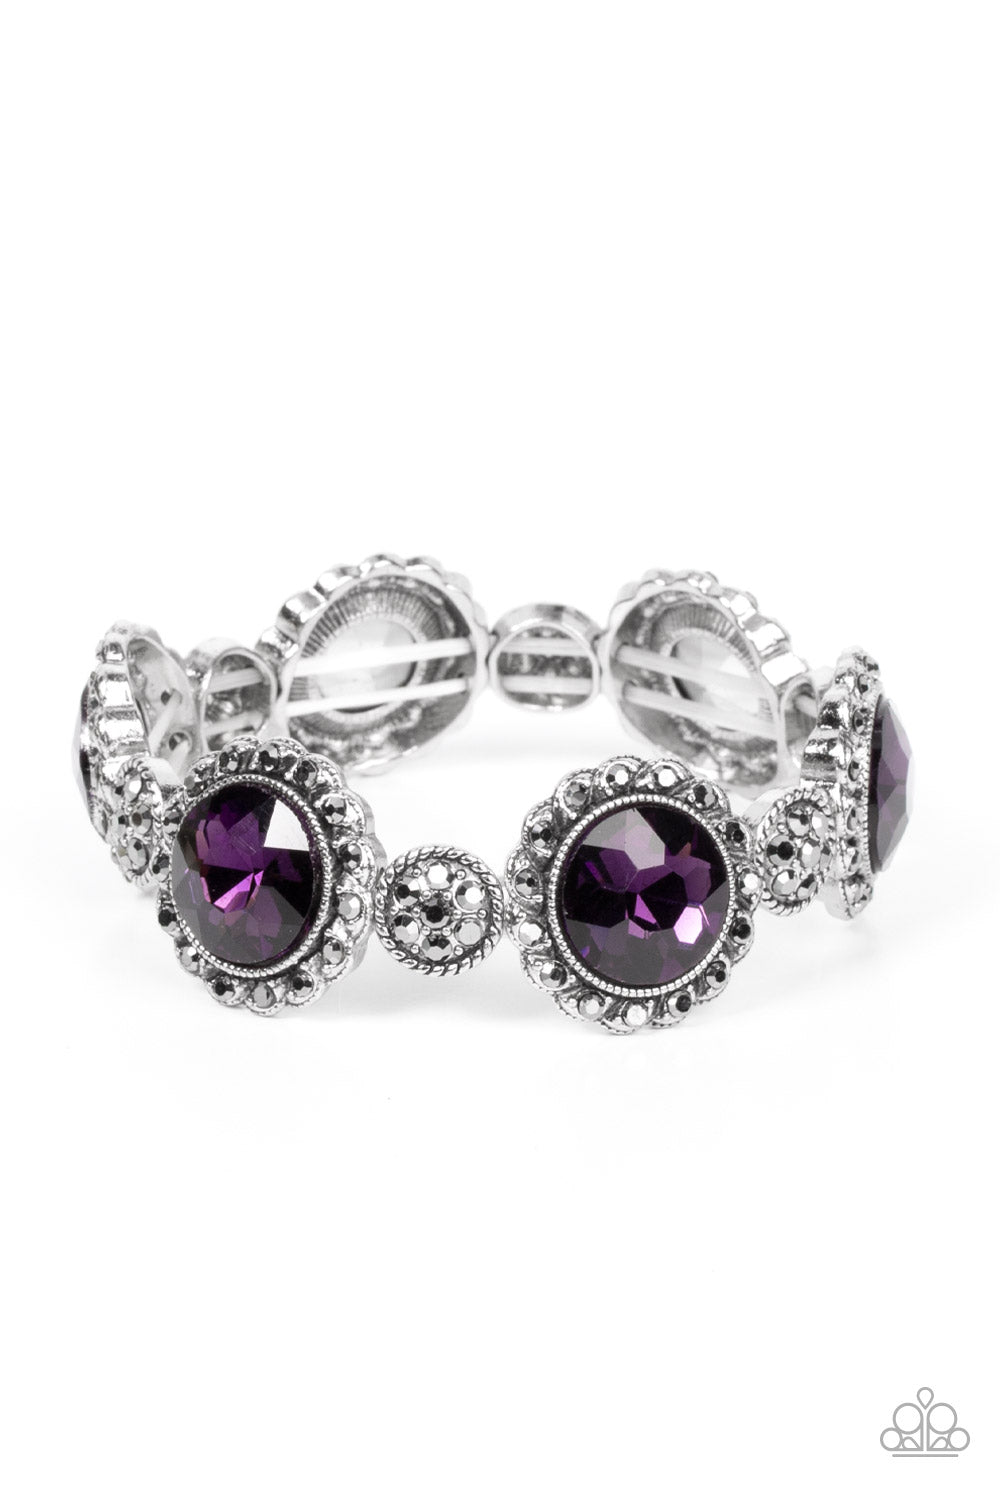 Palace Property - Purple and Silver Bracelet - Paparazzi Accessories - An oversized purple rhinestone adorns the center of a hematite rhinestone petaled floral frame. Infused with hematite dotted silver accents, the glitzy floral frames sparkle along stretchy bands around the wrist for a glamorous finish. Sold as one individual bracelet.